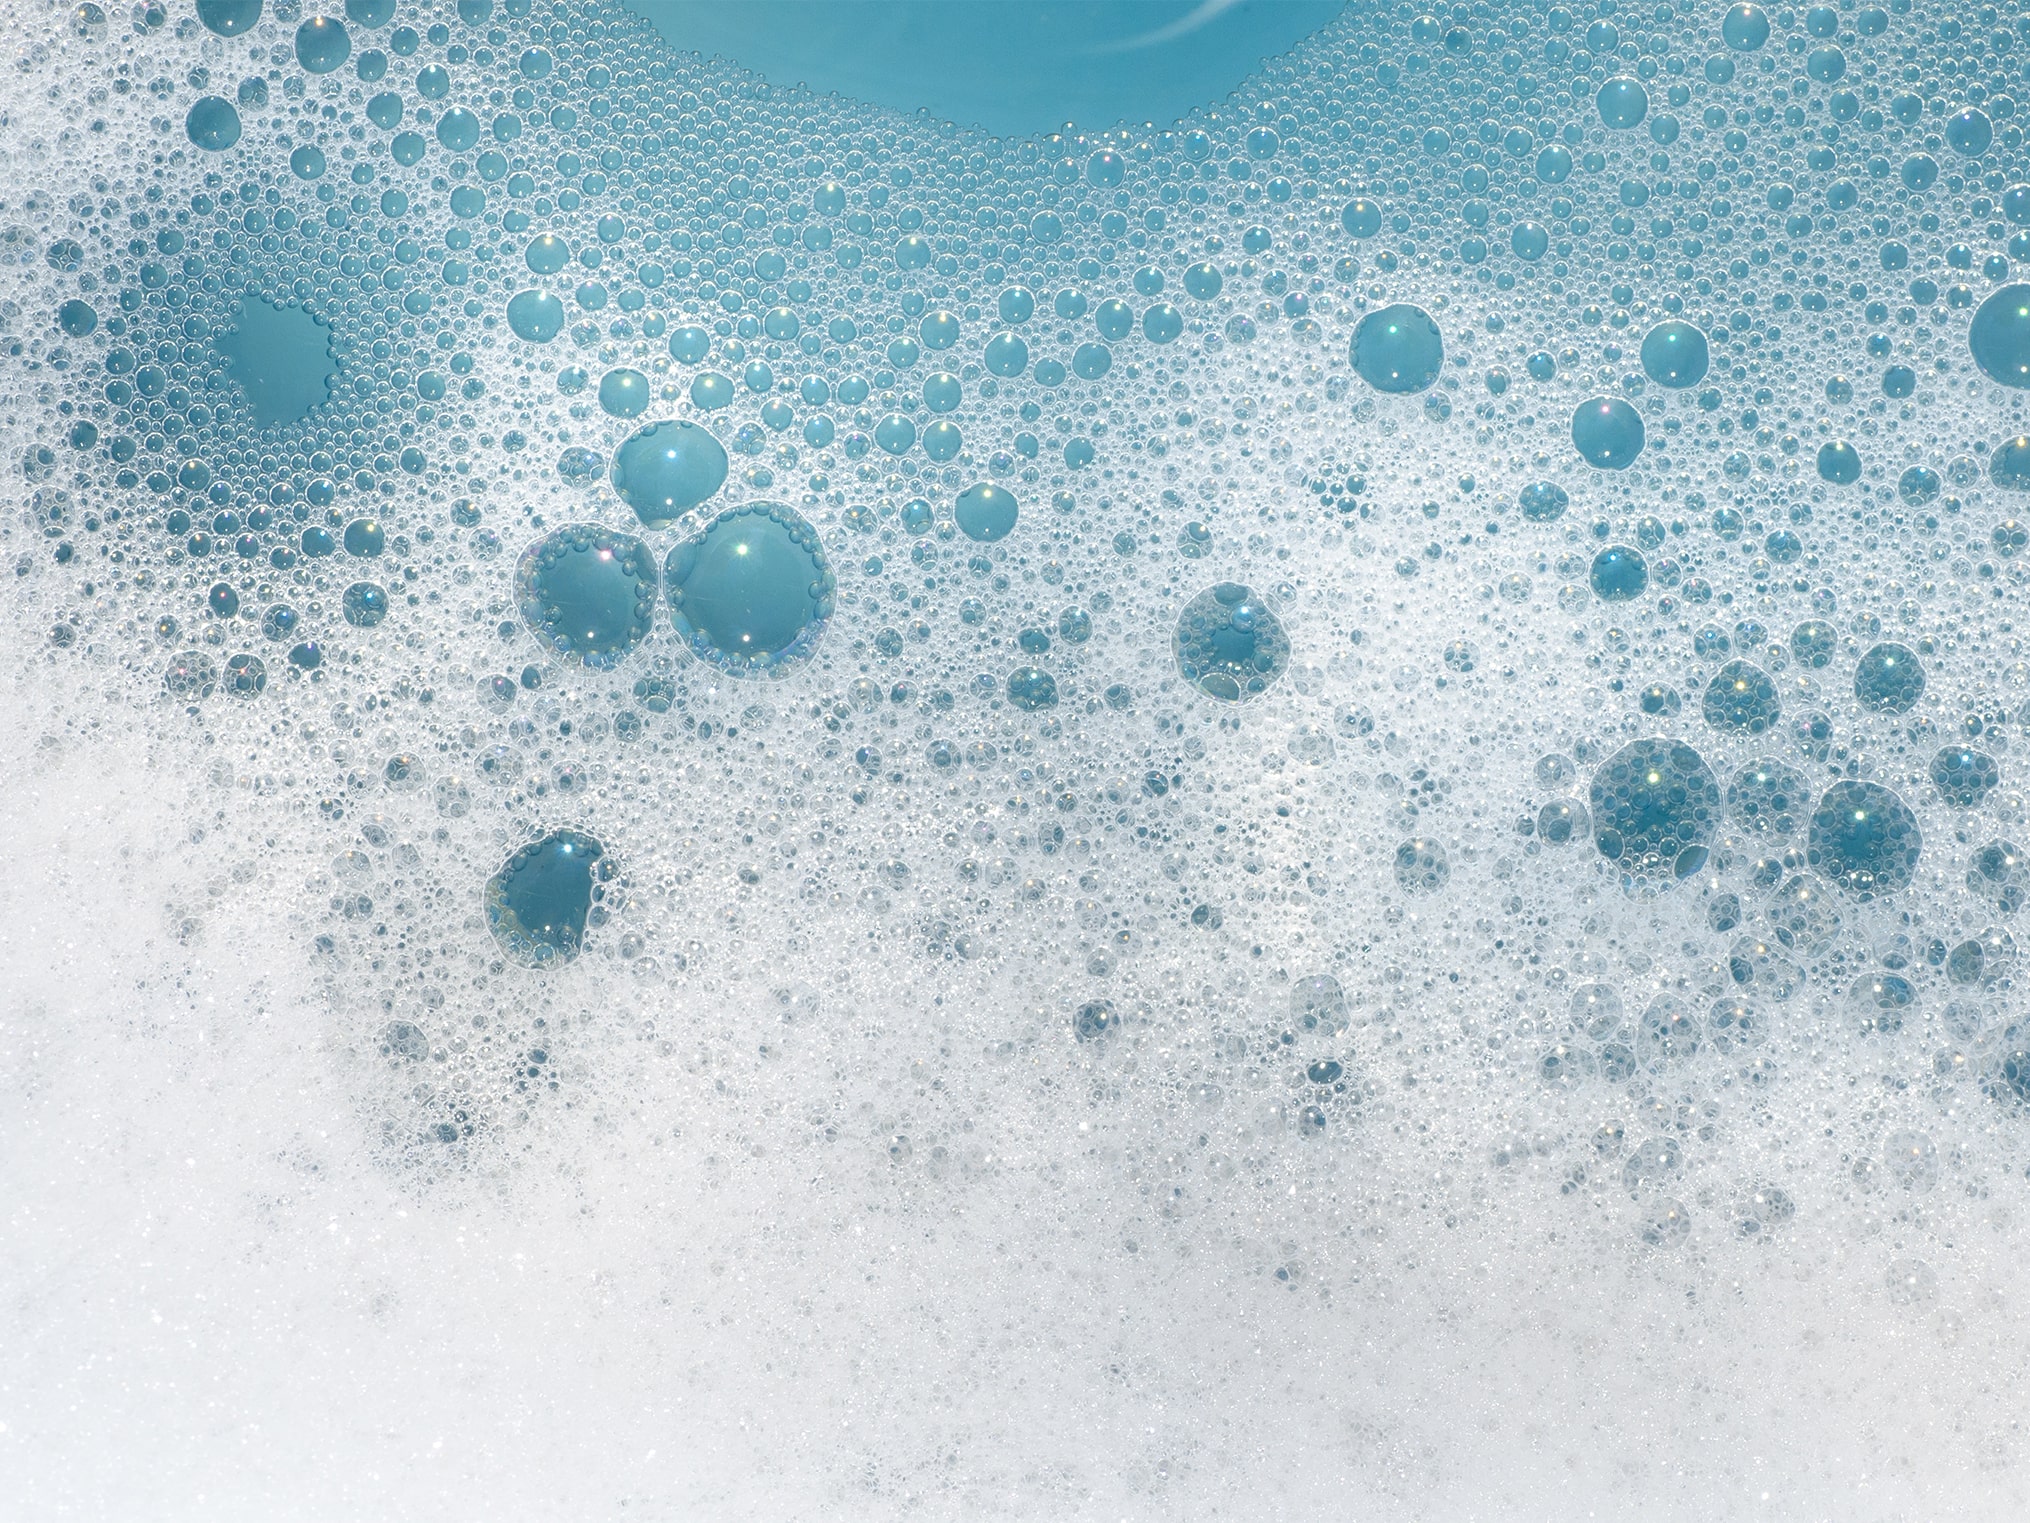 How Make Bubble Bath Bliss in 6 Steps - Free Bunni